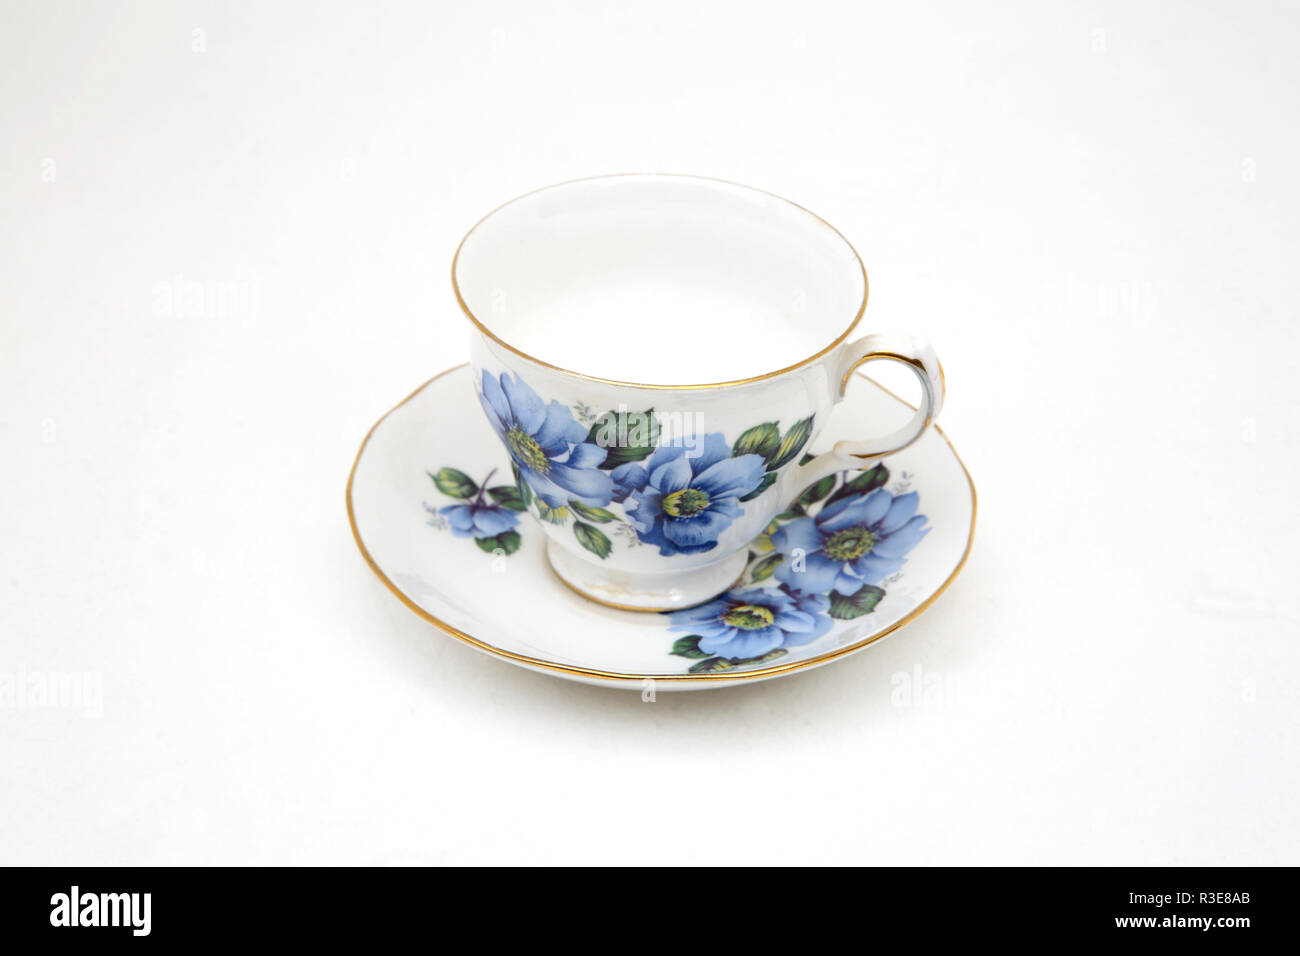 Fancy Cup & Saucer Isolated Stock Photo by ©hafiz.ismail 34421107